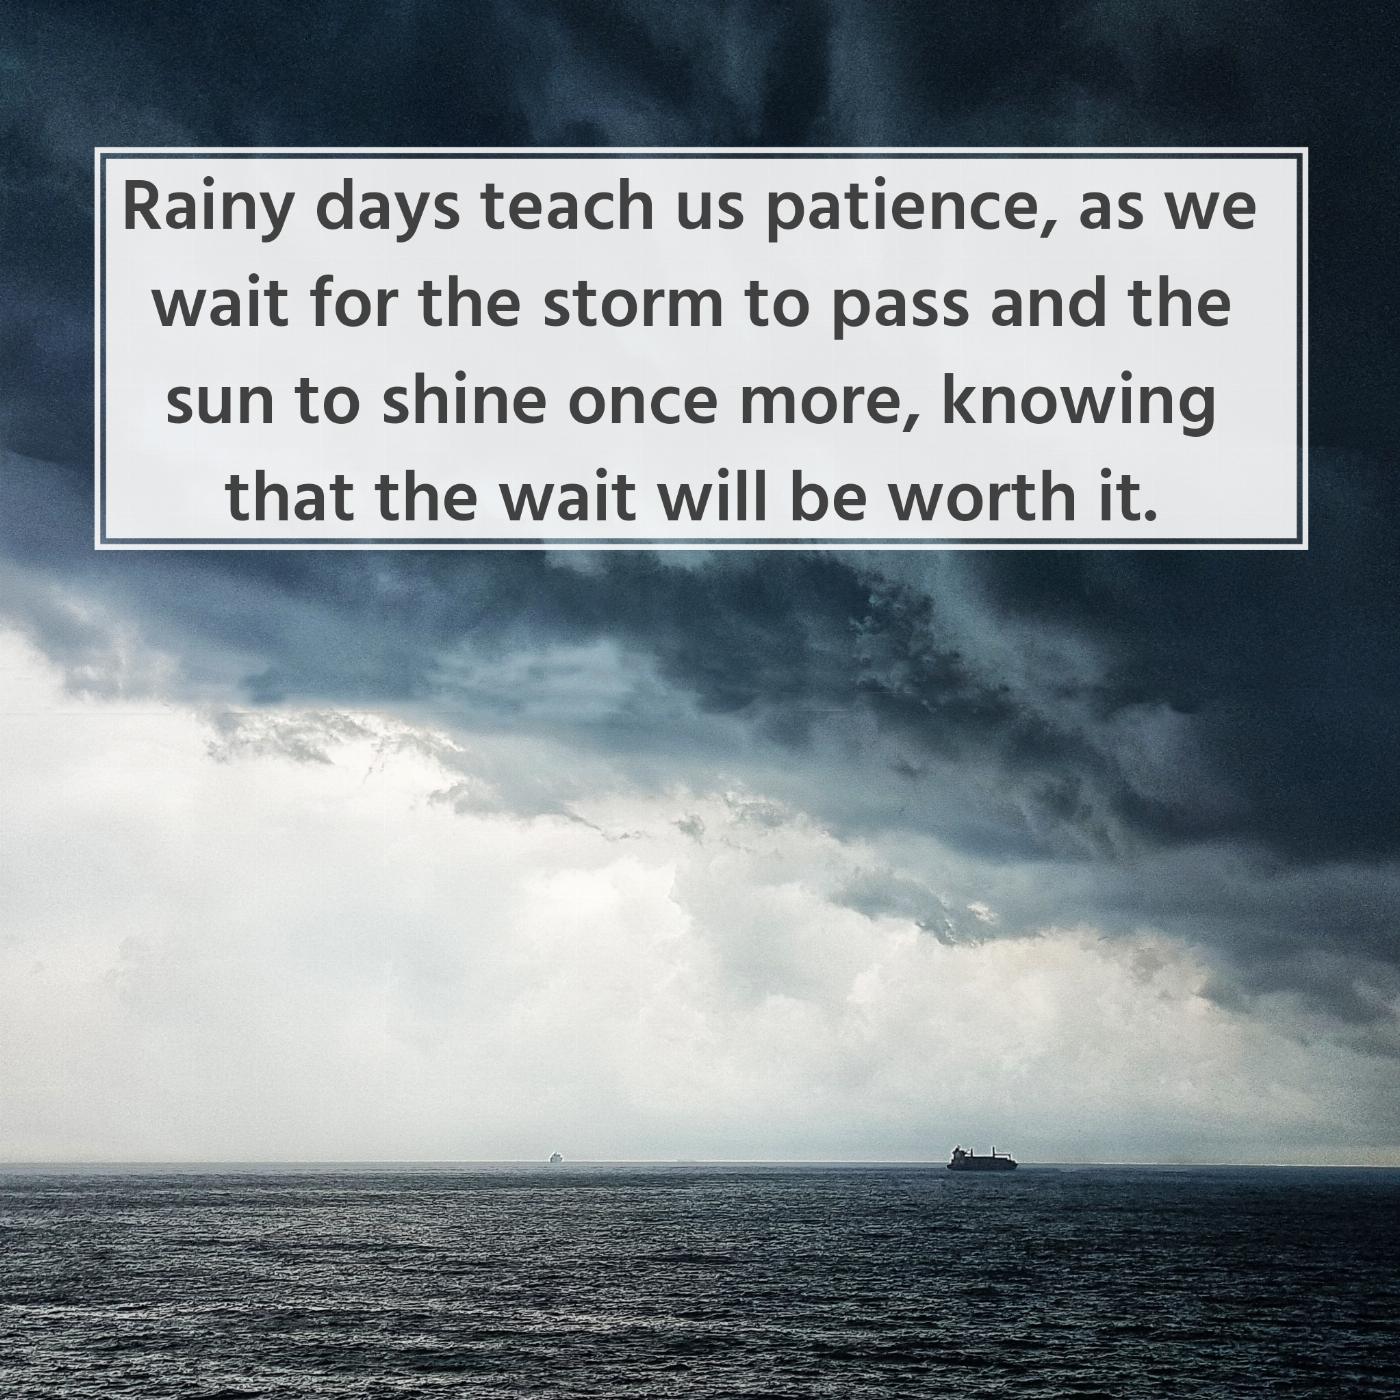 Rainy days teach us patience as we wait for the clouds to part